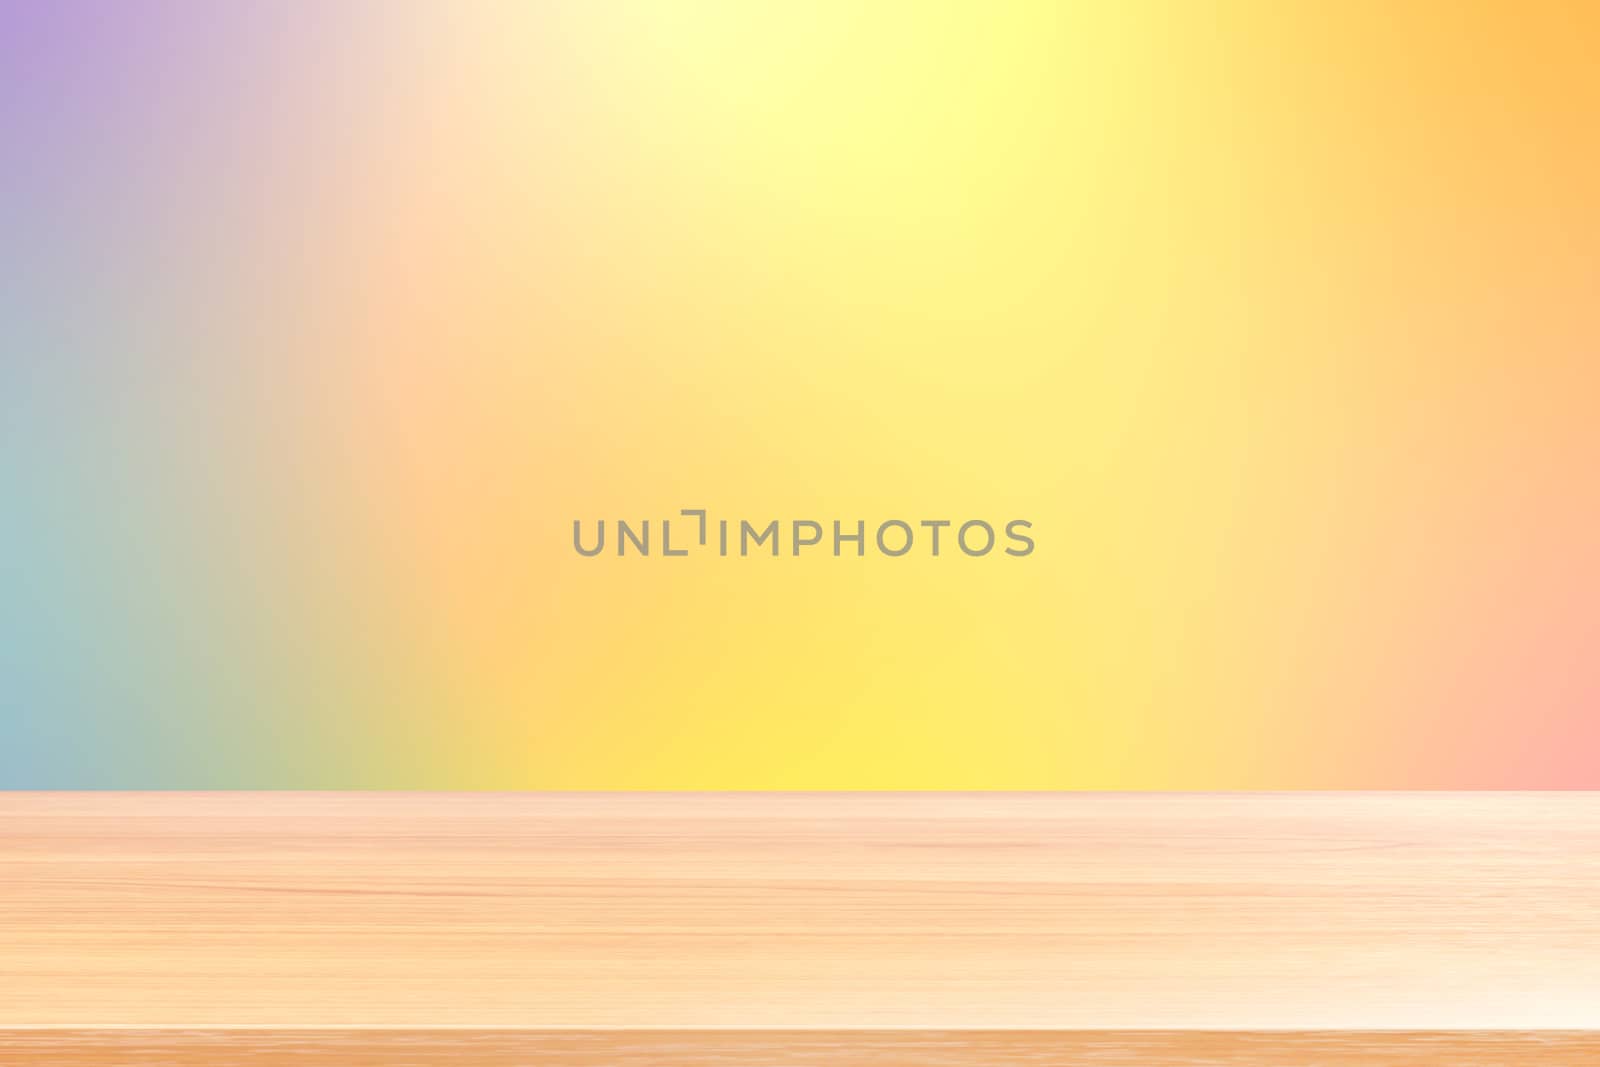 empty wood table floor on gradient yellow orange soft background, wood table board empty front colorful gradient, wooden plank blank on light orange gradient for display products or banner advertising